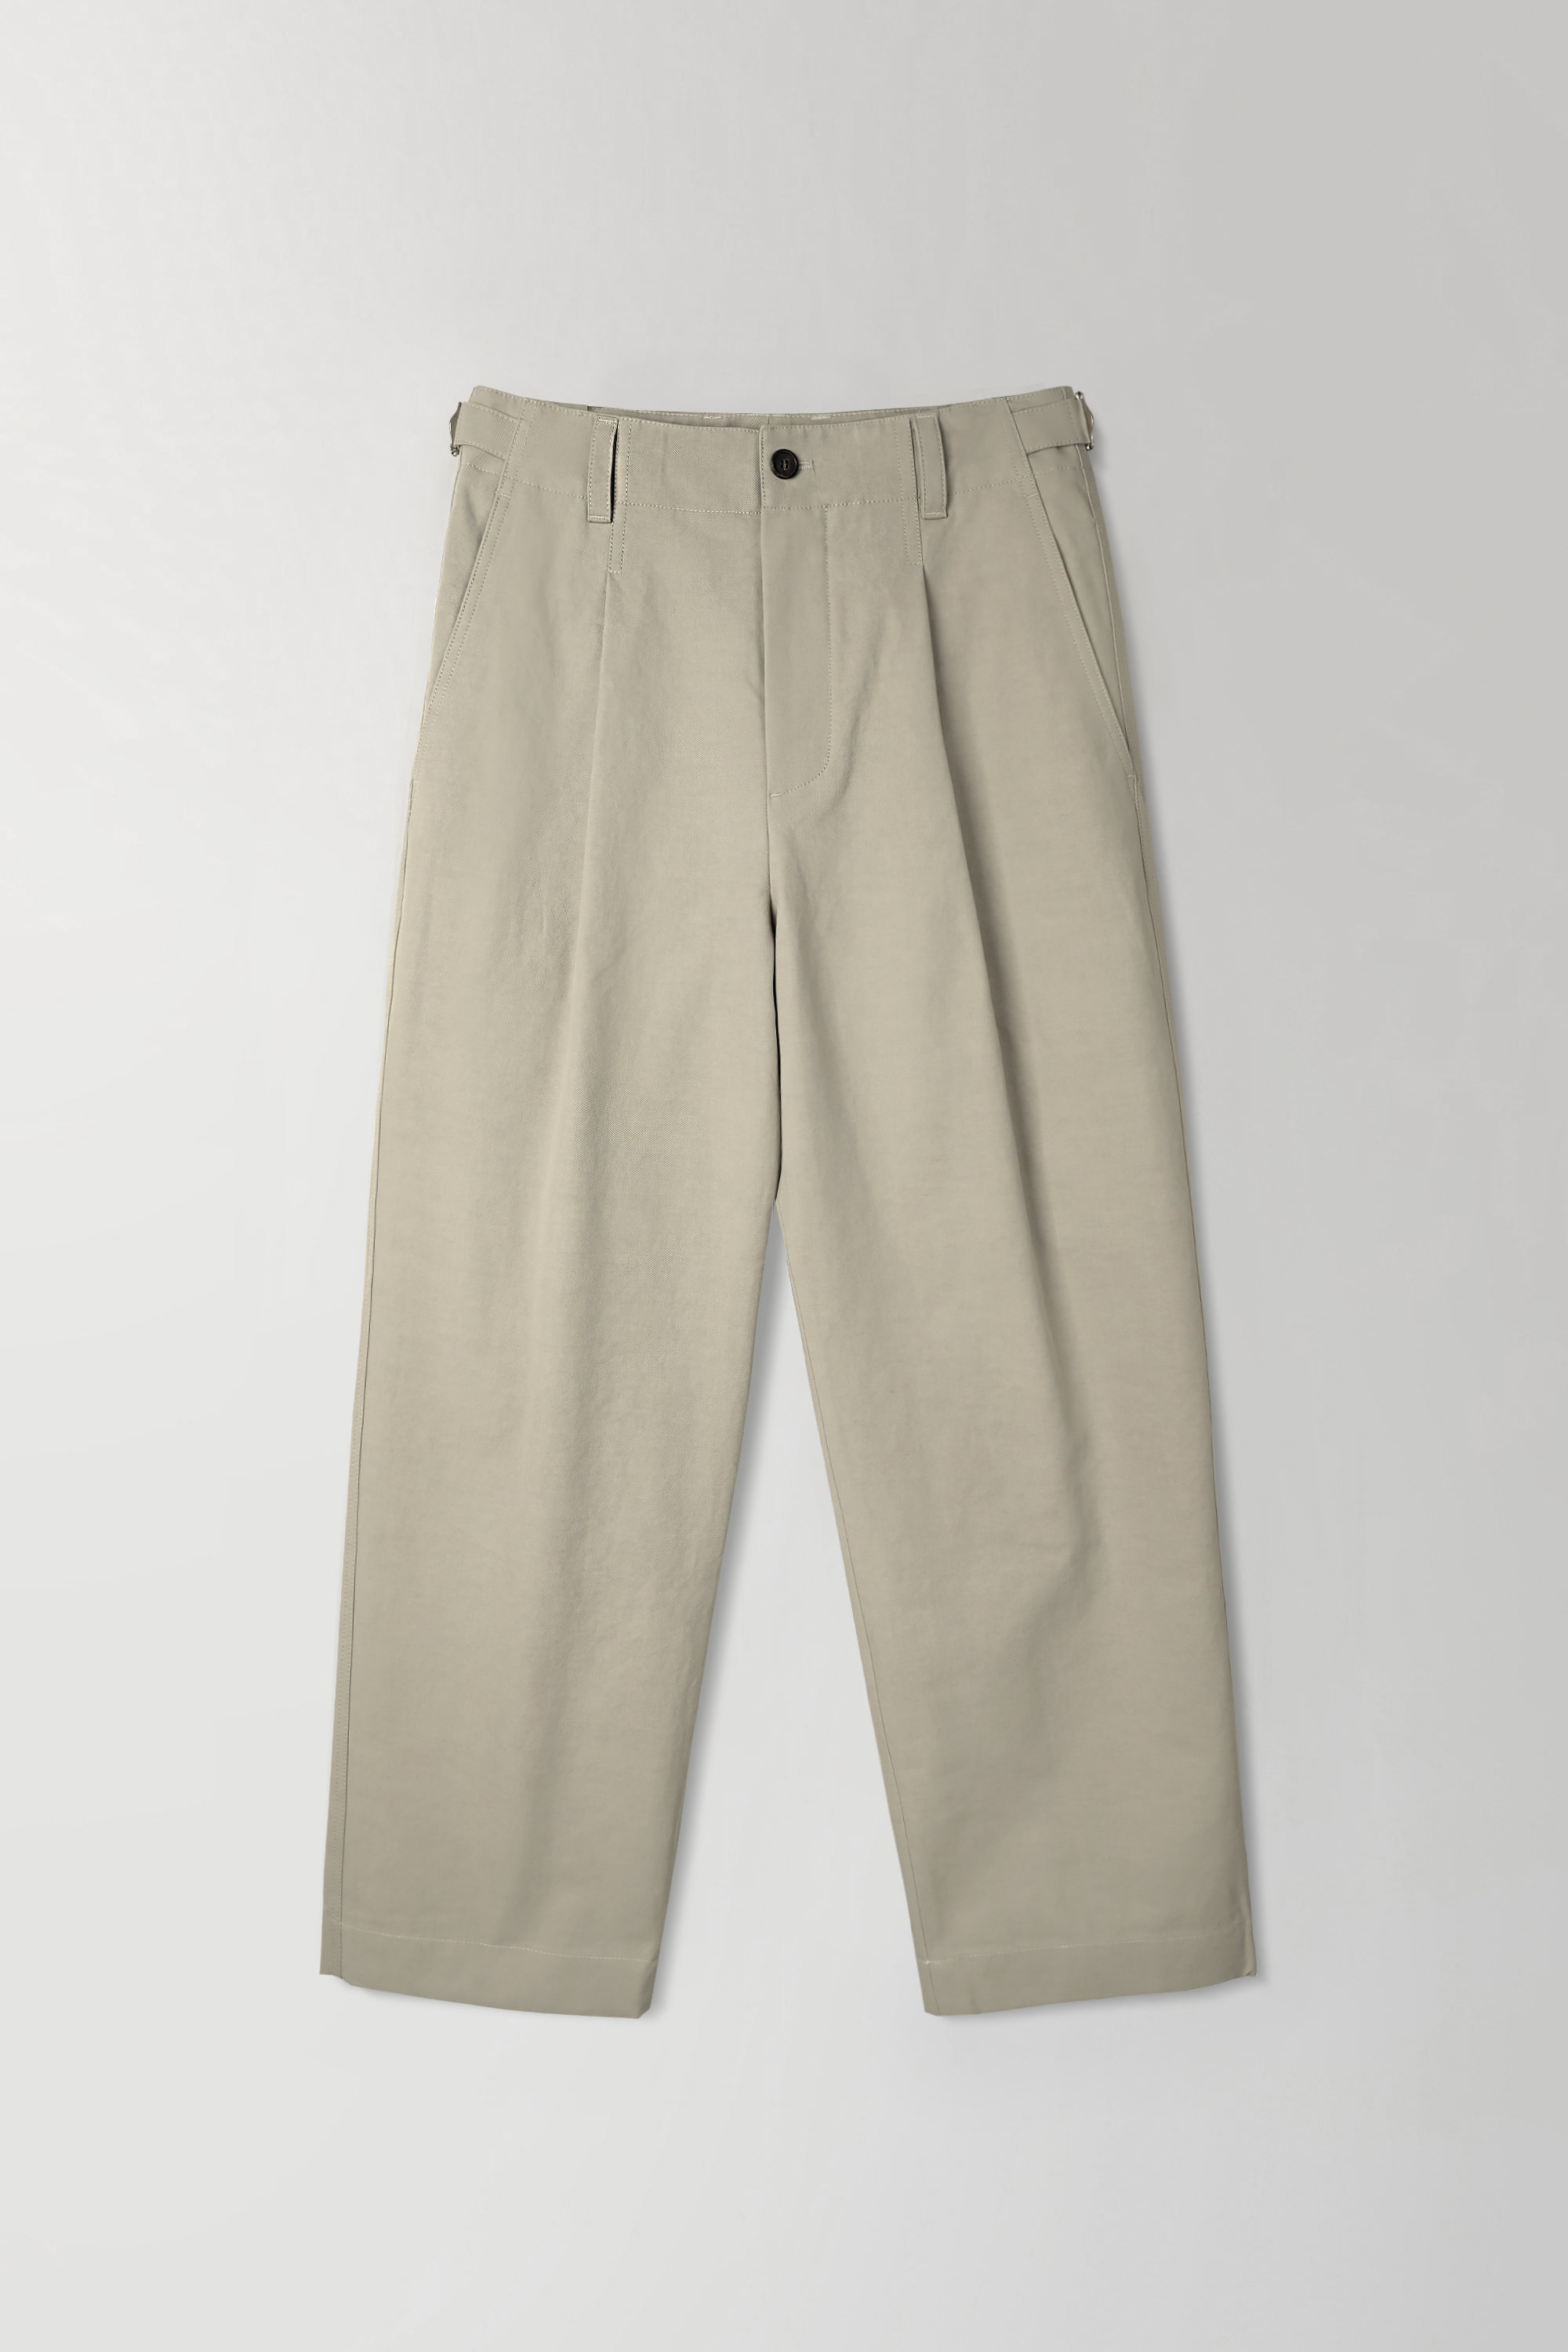 [EXCLUSIVE} STRUCTURED CHINO PANTS - OLIVE GREY